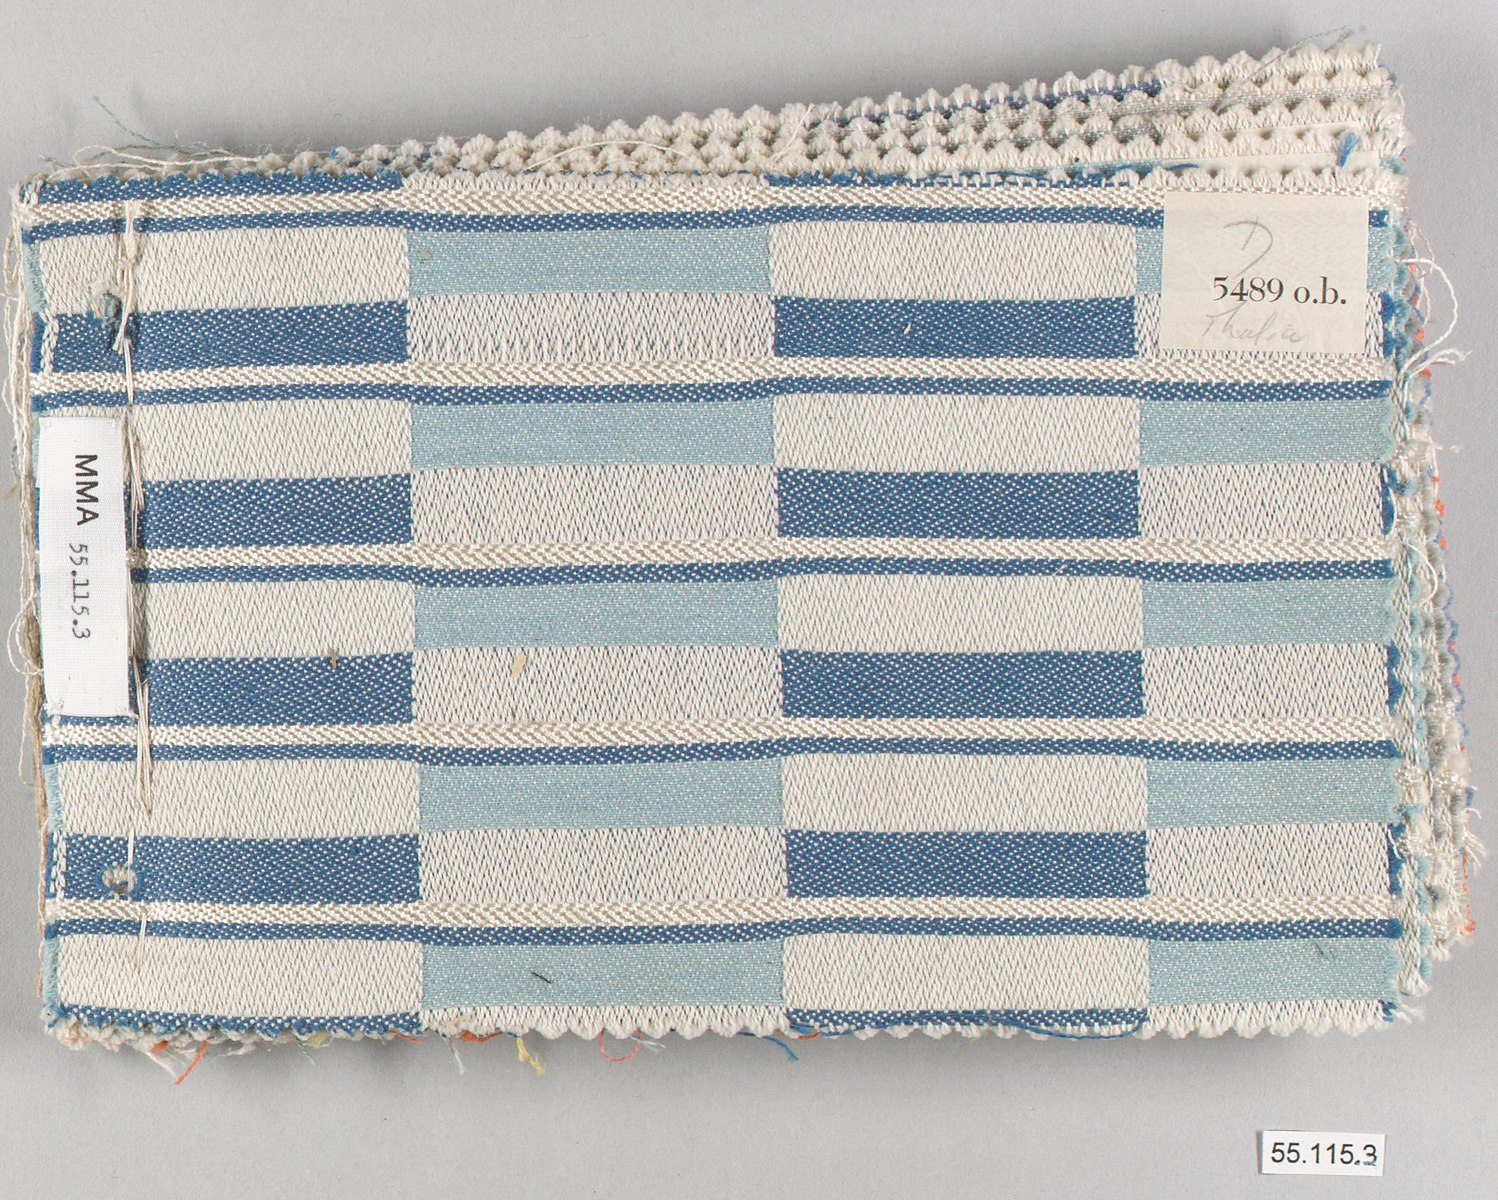 a book of textile weaving in blues and whites